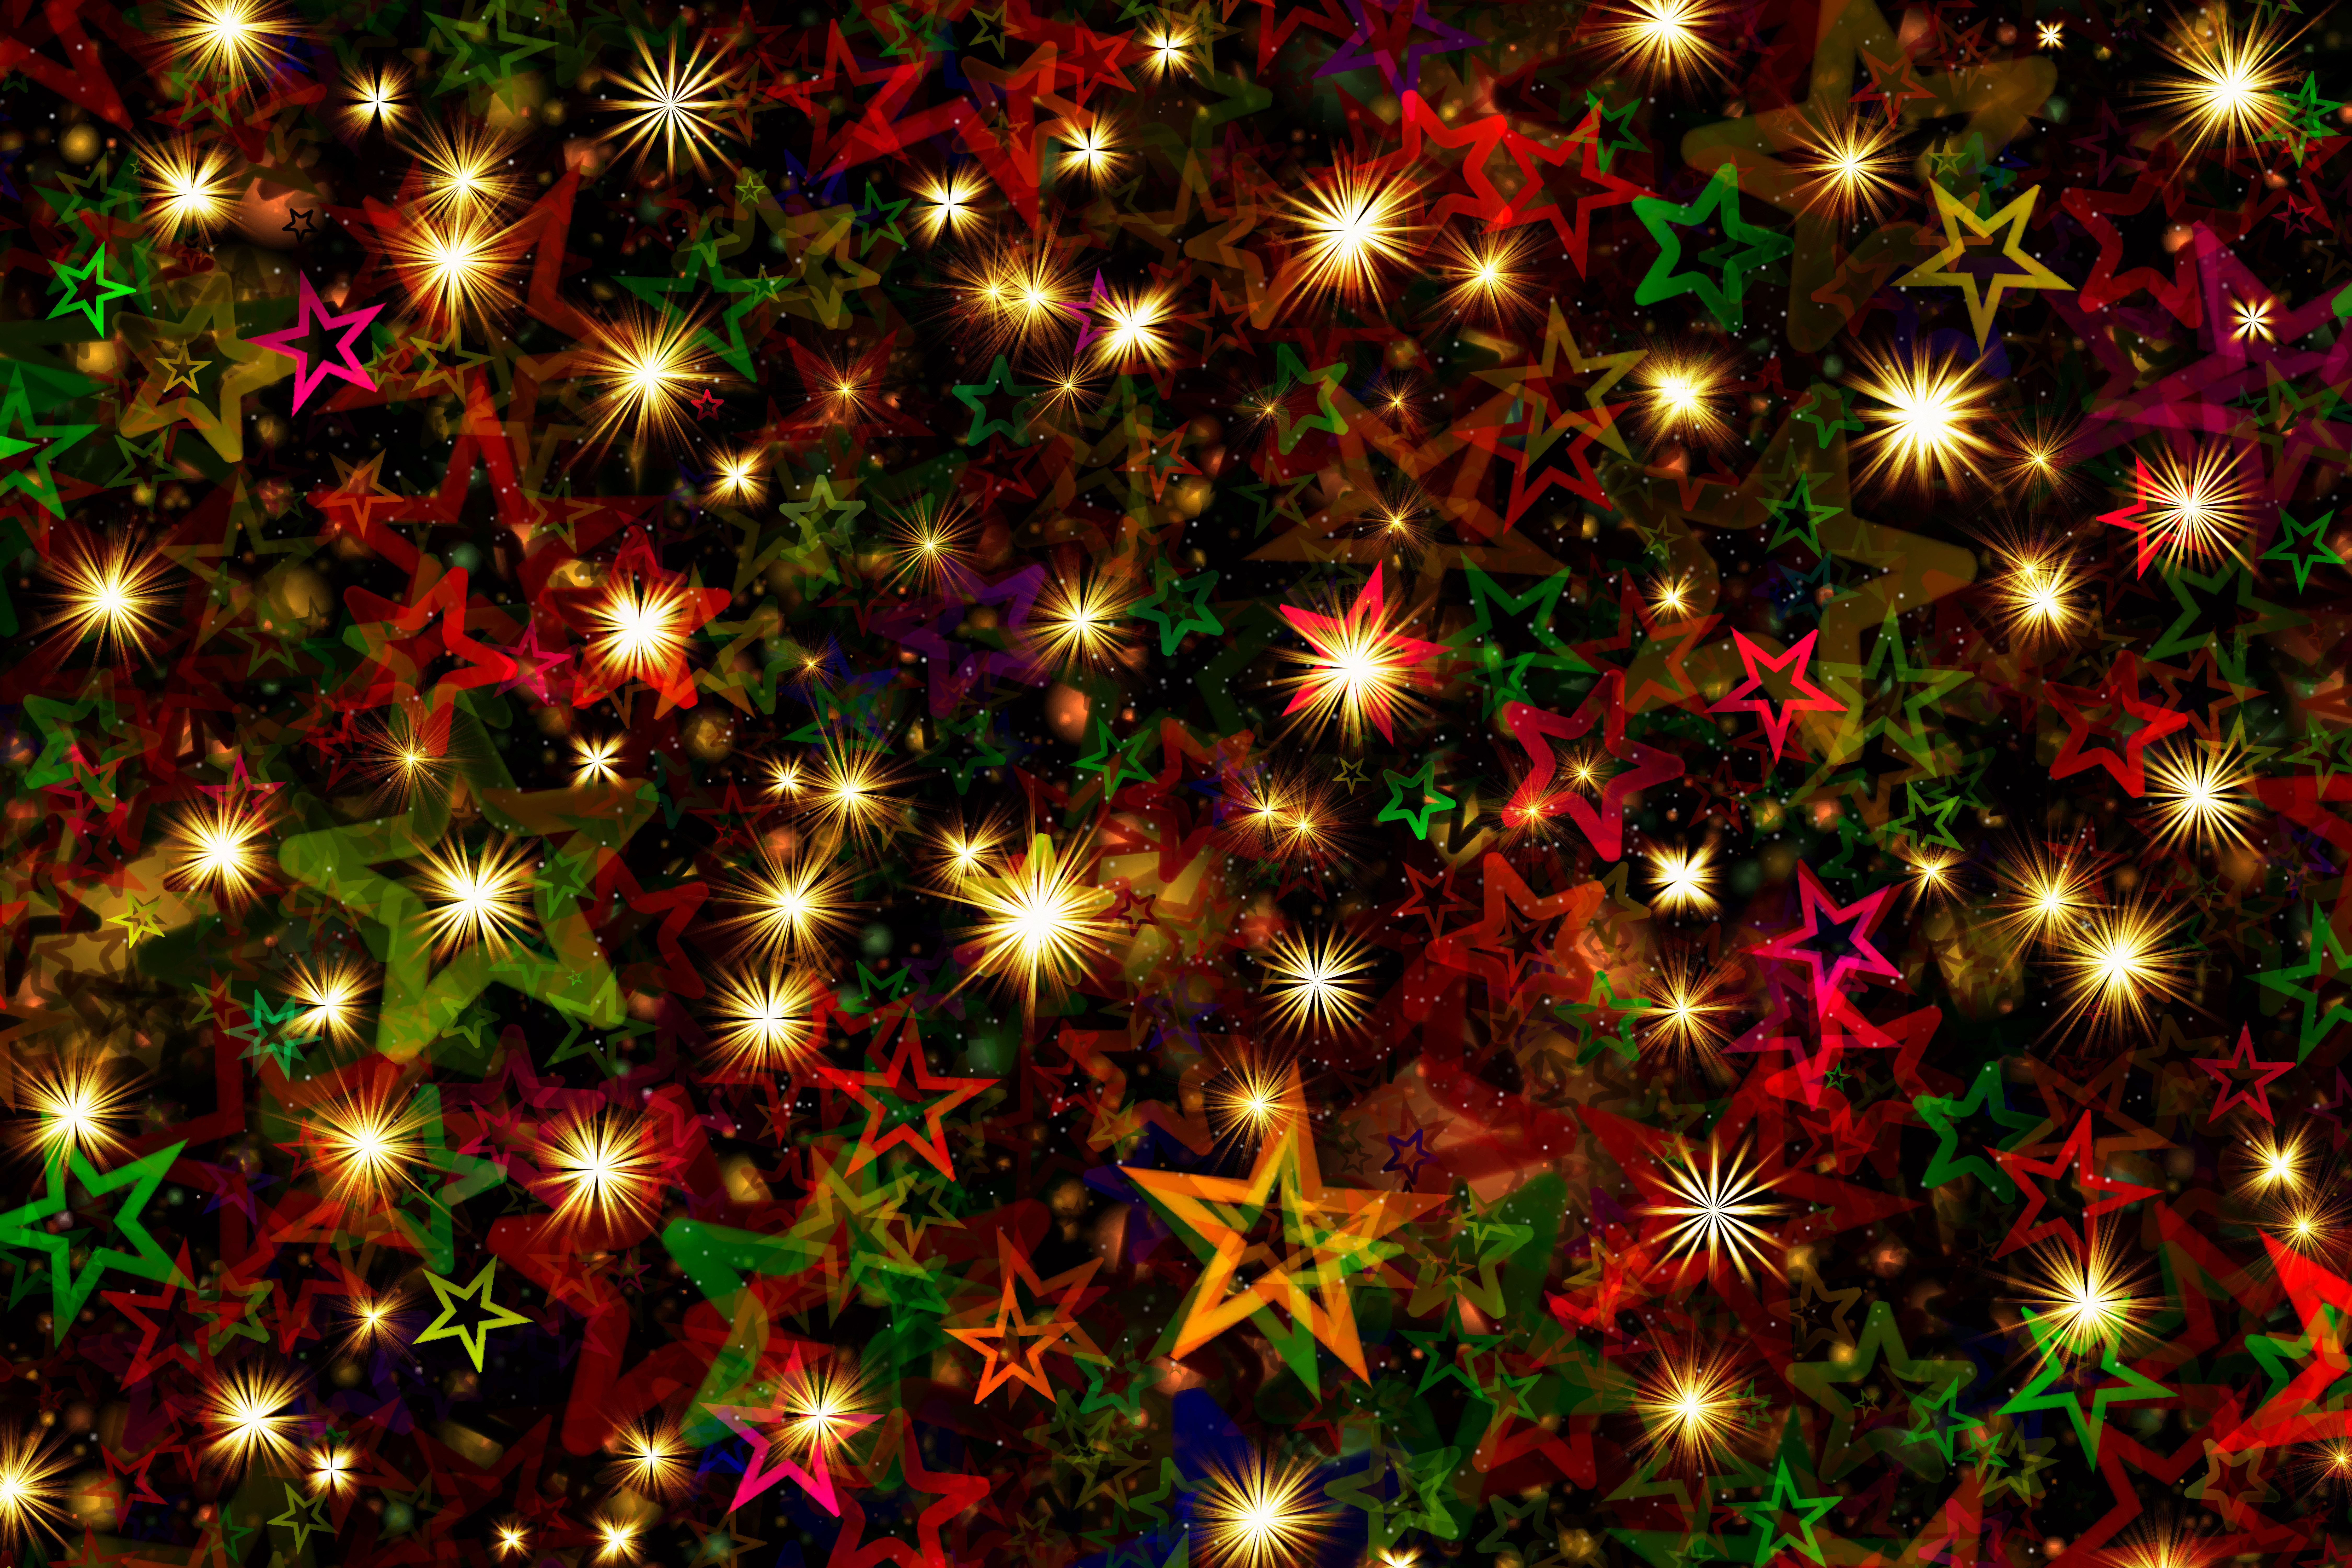 HD wallpaper, Colorful, Aesthetic, 5K, Glowing Lights, Christmas Decoration, Advent, 8K, Christmas Stars